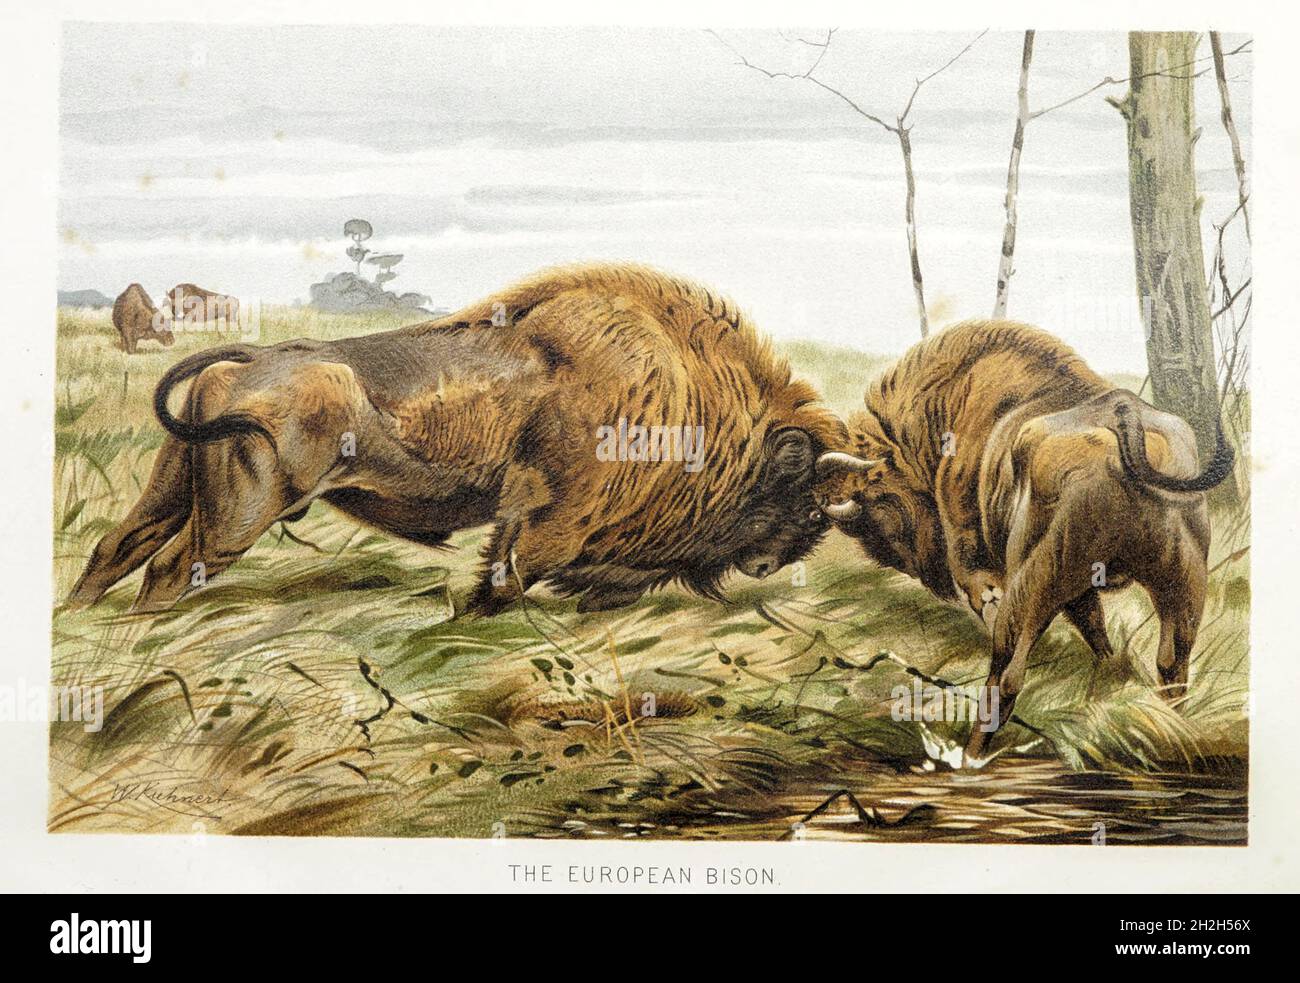 European bison (Bison bonasus) or the European wood bison, also known as the wisent or the zubr or colloquially the European buffalo, is a European species of bison. From the book ' Royal Natural History ' Volume 2 Edited by Richard Lydekker, Published in London by Frederick Warne & Co in 1893-1894 Stock Photo